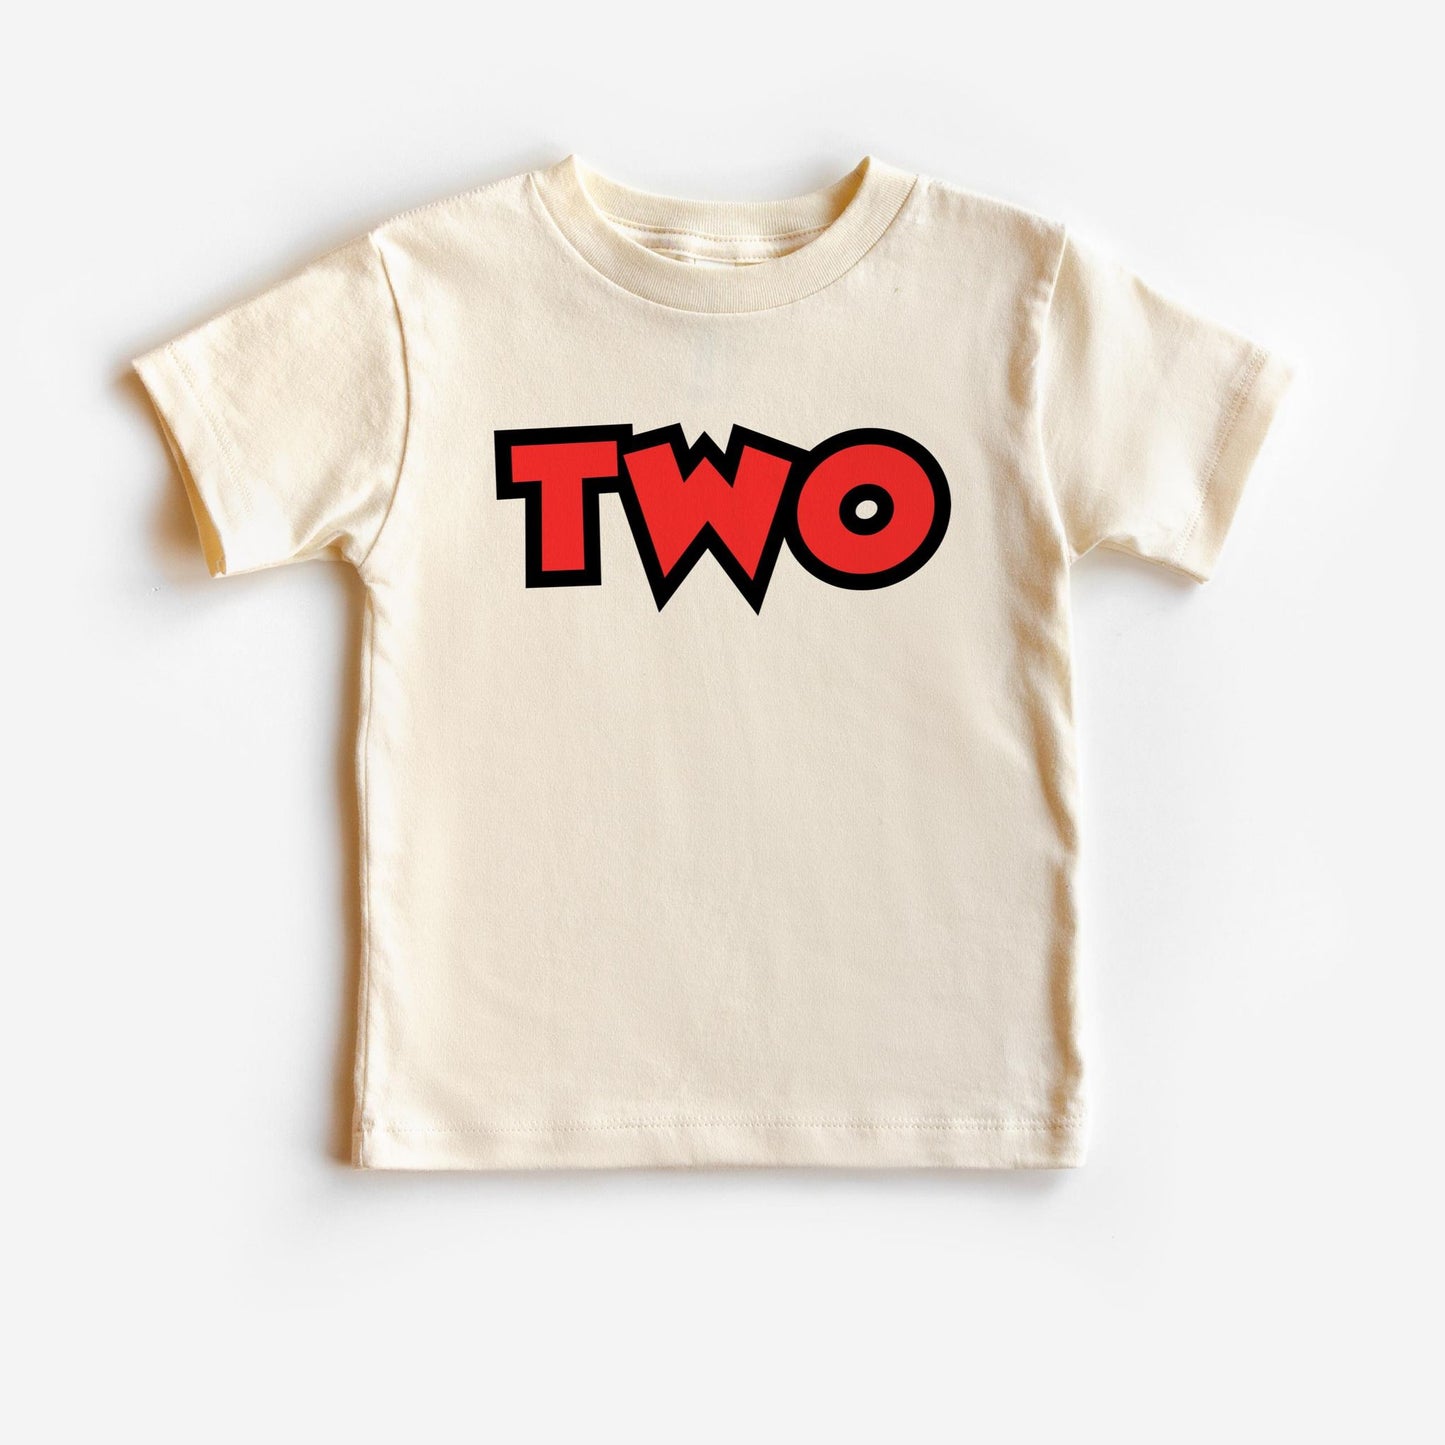 Two T-shirt